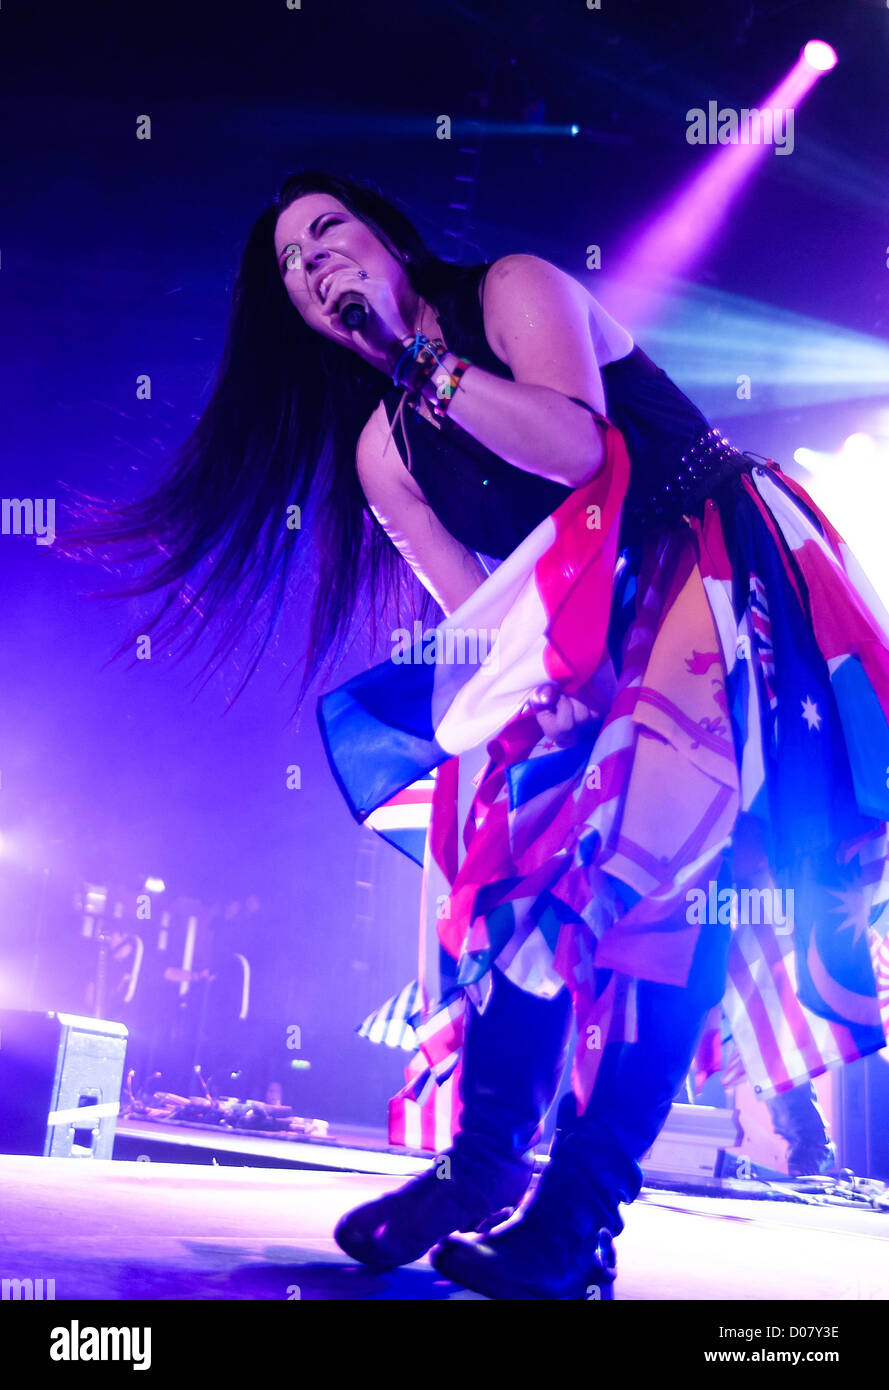 Grammy Award winning rock band Evanescence plays Wembley Arena on 09/11/2012 at Wembley Arena, London. Persons pictured: Amy Lee. Picture by Julie Edwards Stock Photo